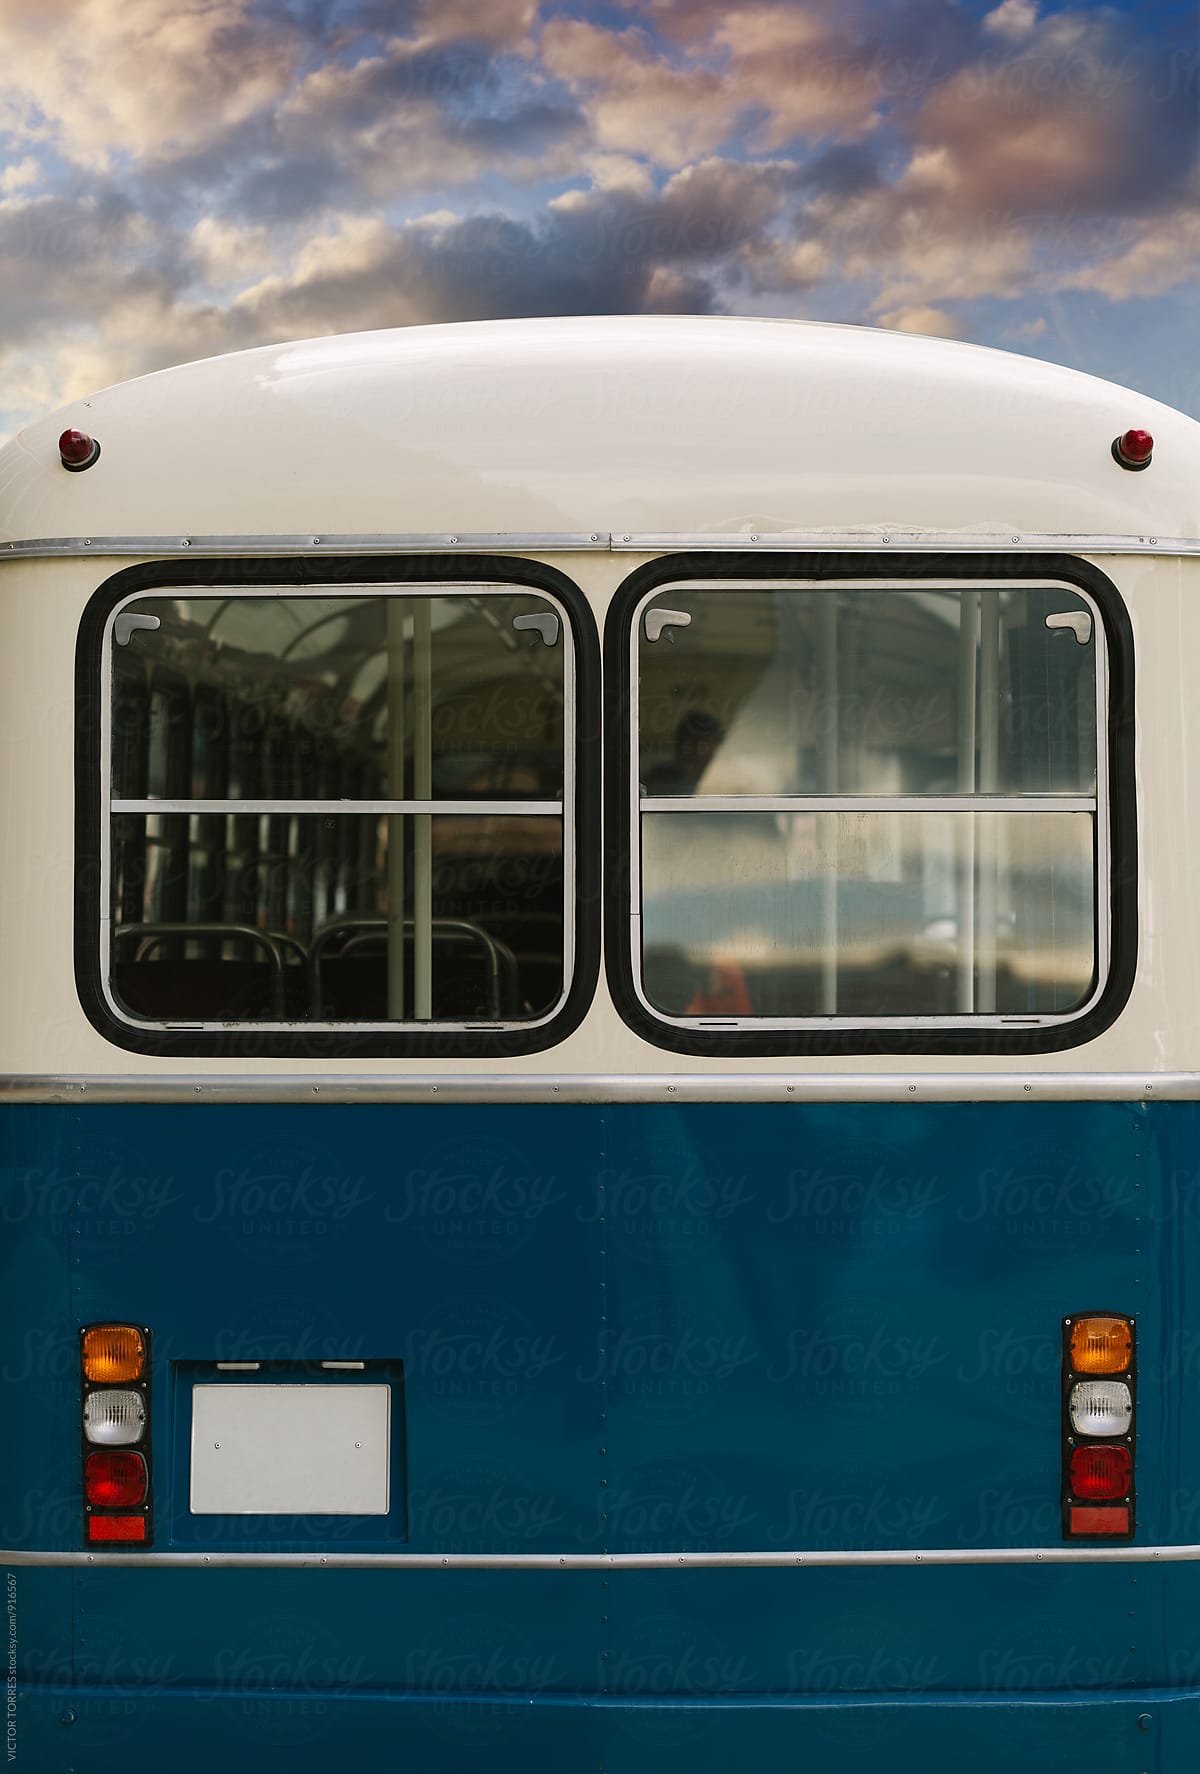 Detail of an Old Bus Parked in the Street at Sunset